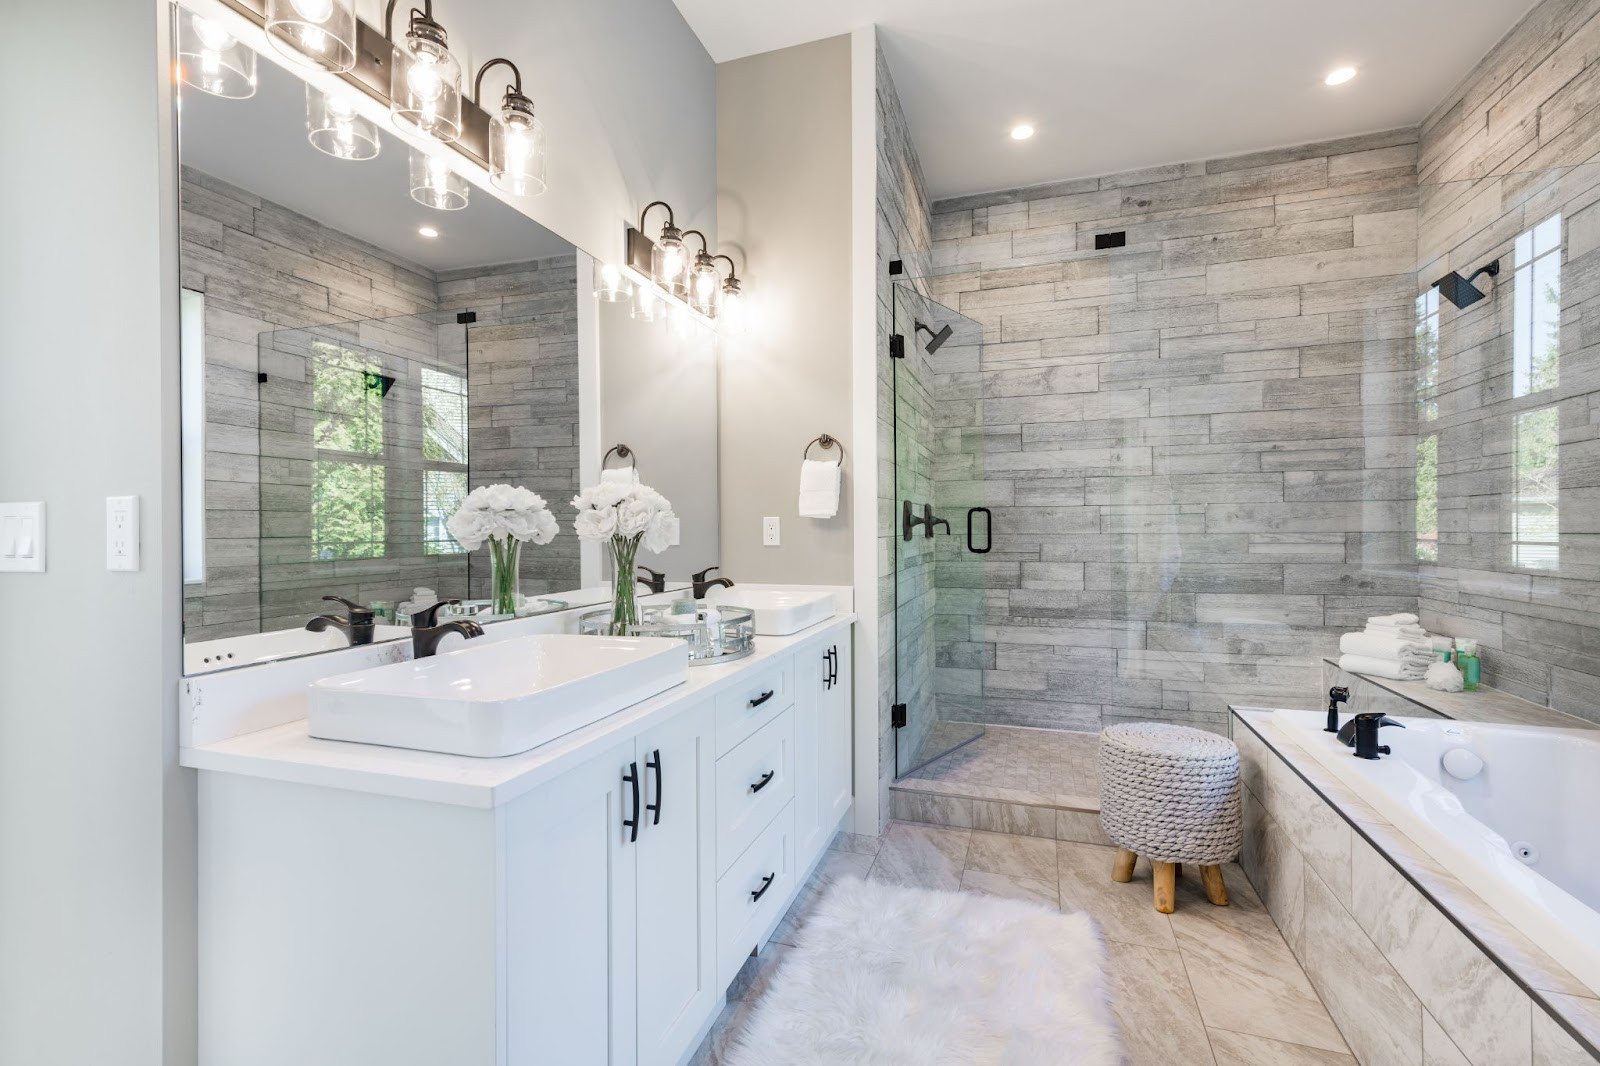 Design Features To Include In Your Luxury Master Bathroom